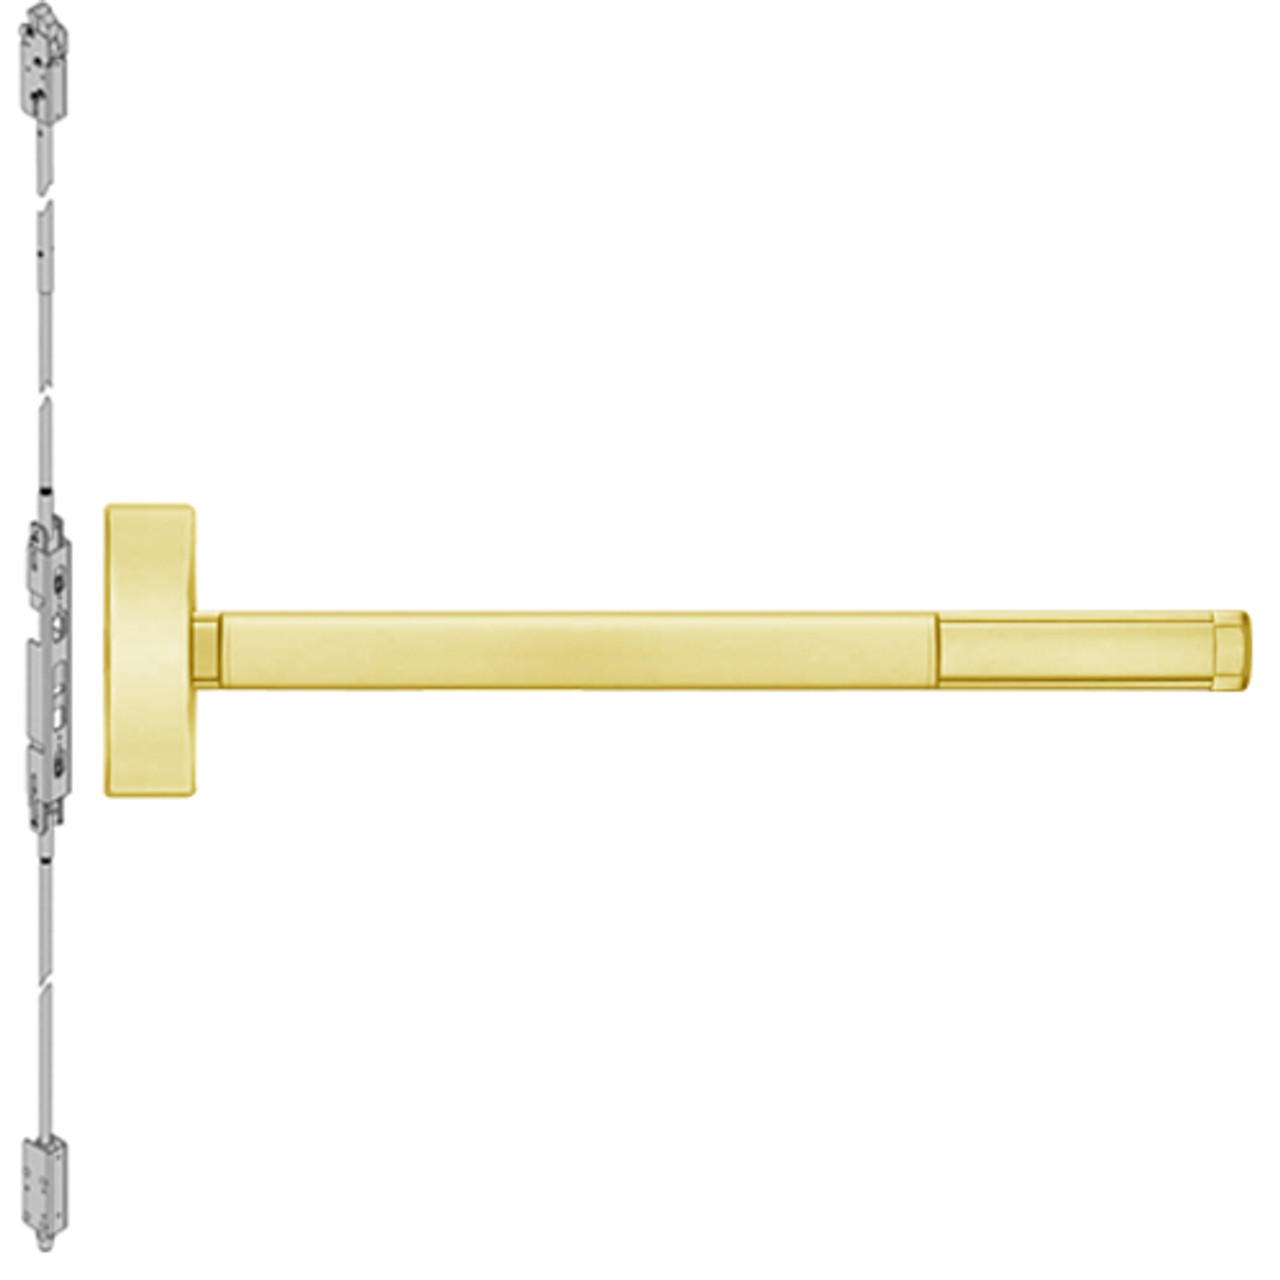 TS2802-605-48 PHI 2800 Series Concealed Vertical Rod Exit Device with Touchbar Monitoring Switch Prepped for Dummy Trim in Bright Brass Finish